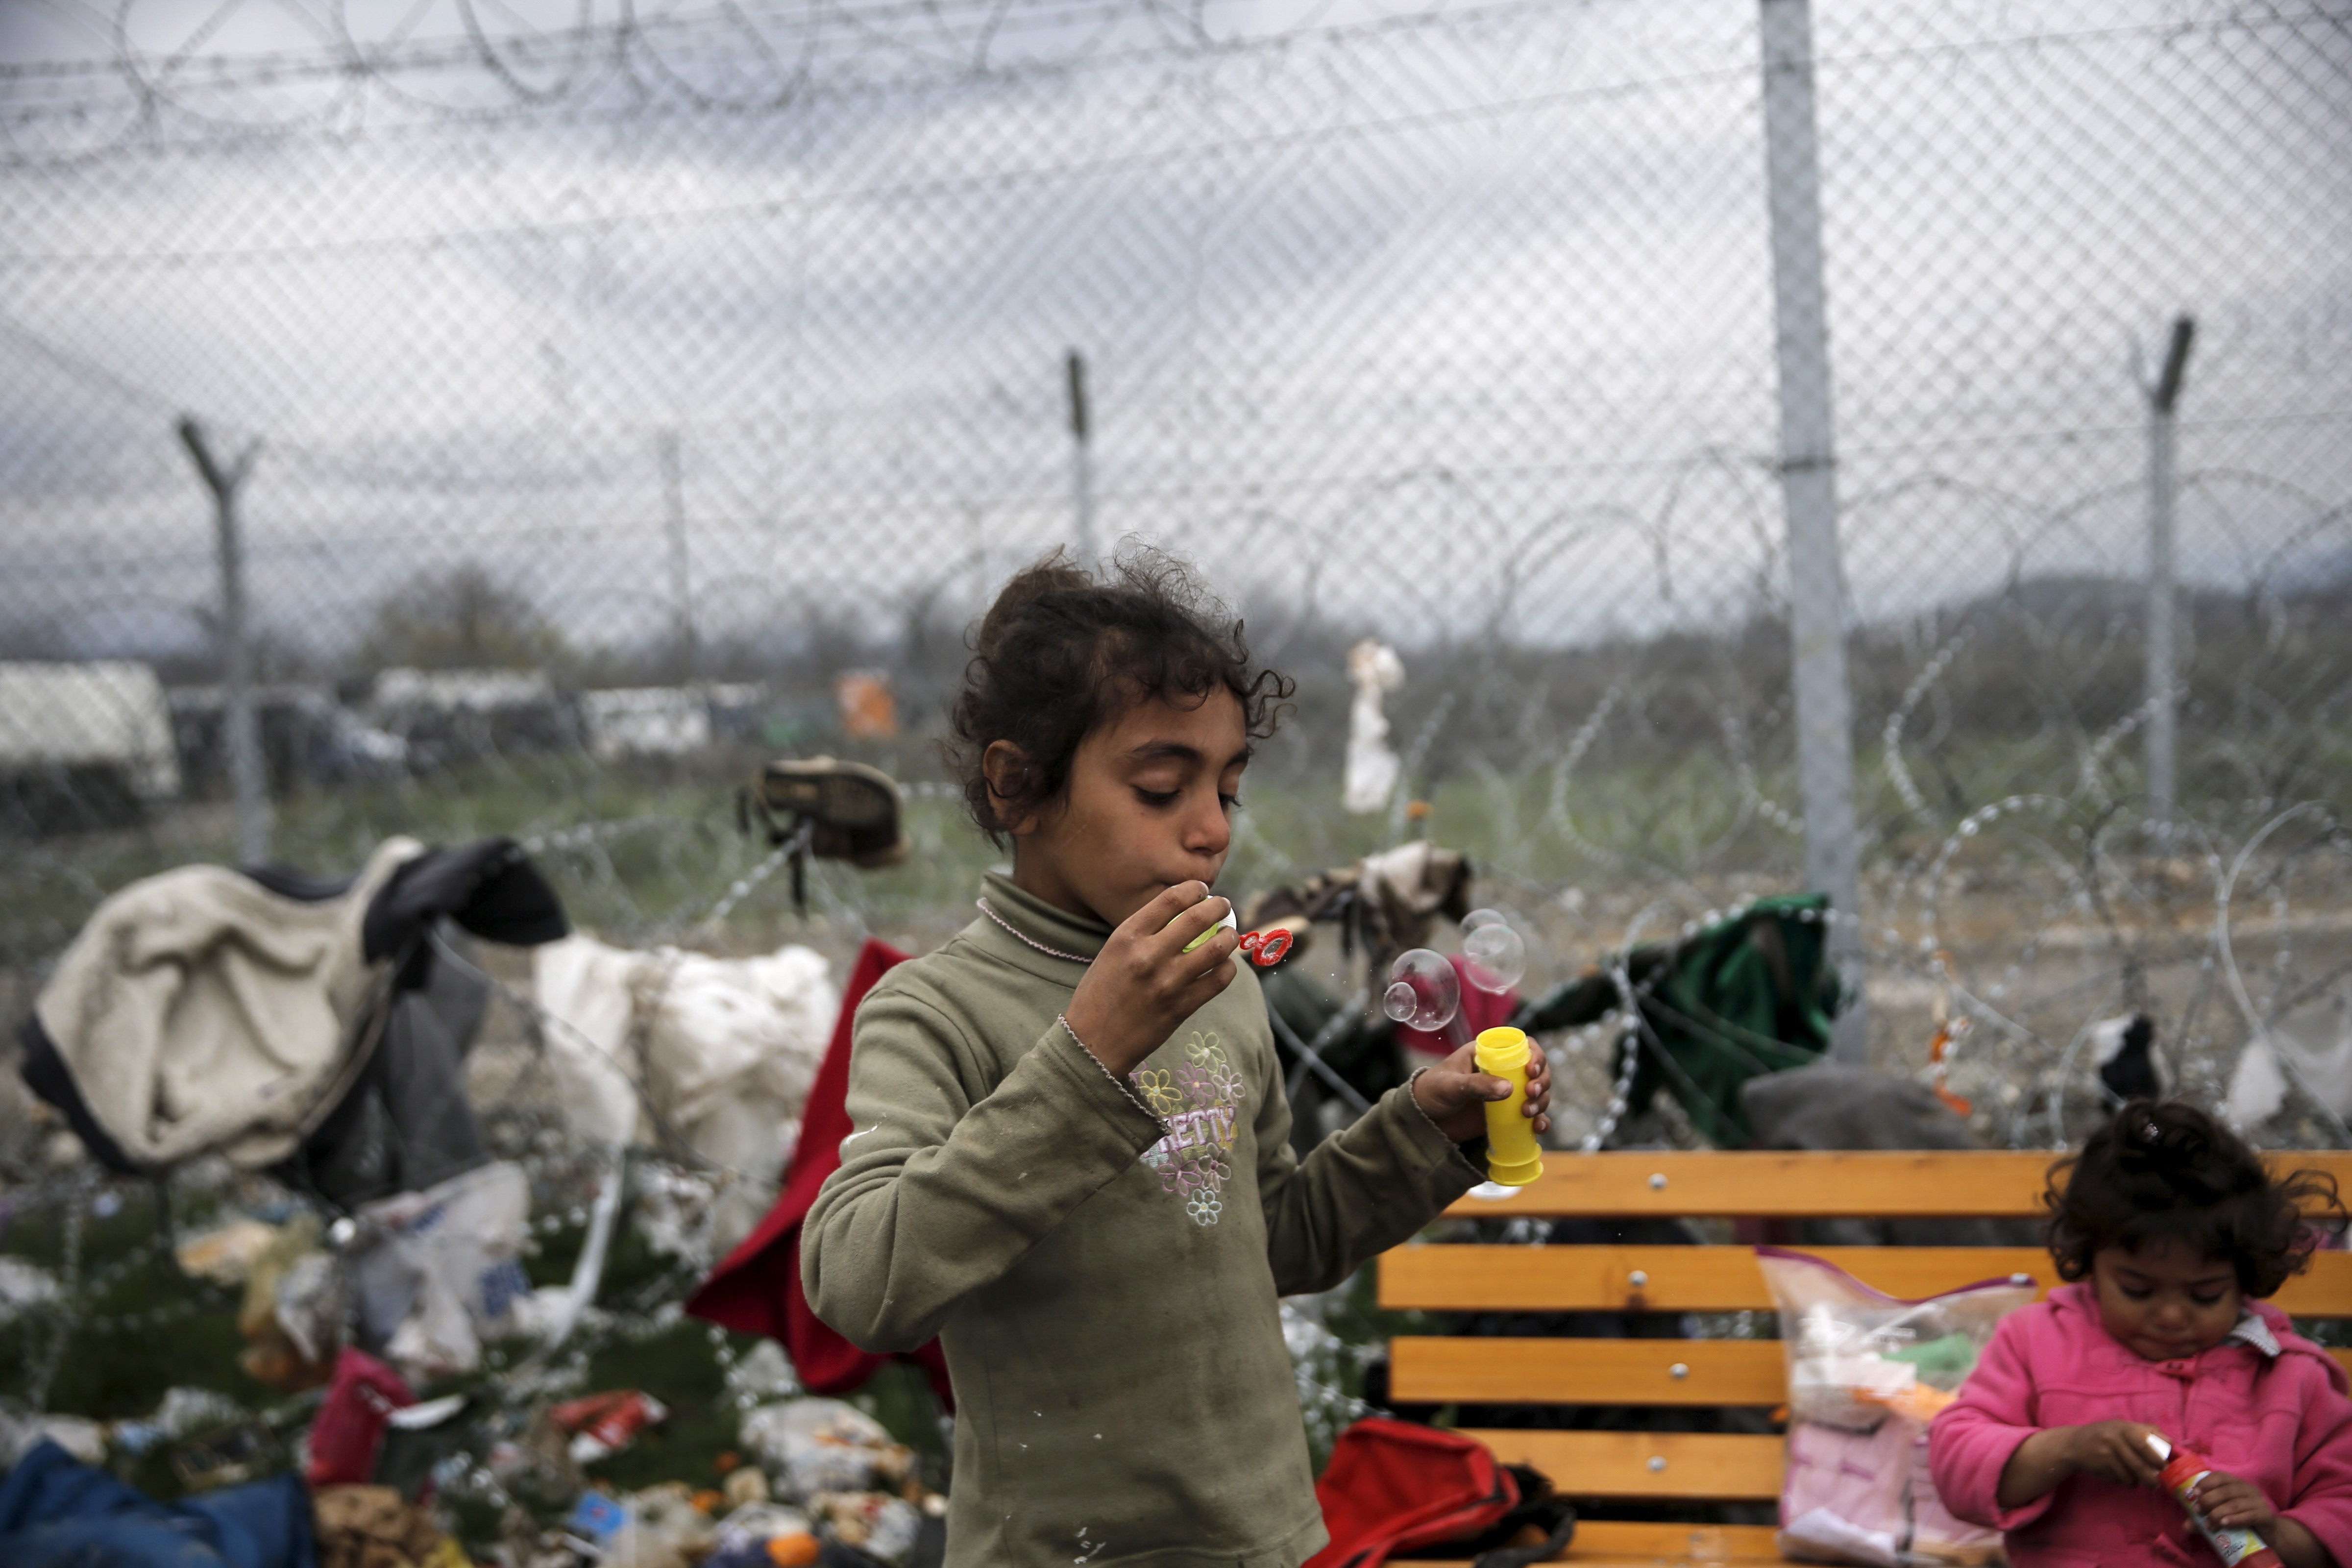 A Syrian refugee girl blows soap bubbles next to the border fence at the Greek-Macedonian border, at a makeshift camp for refugees and migrants near the village of Idomeni